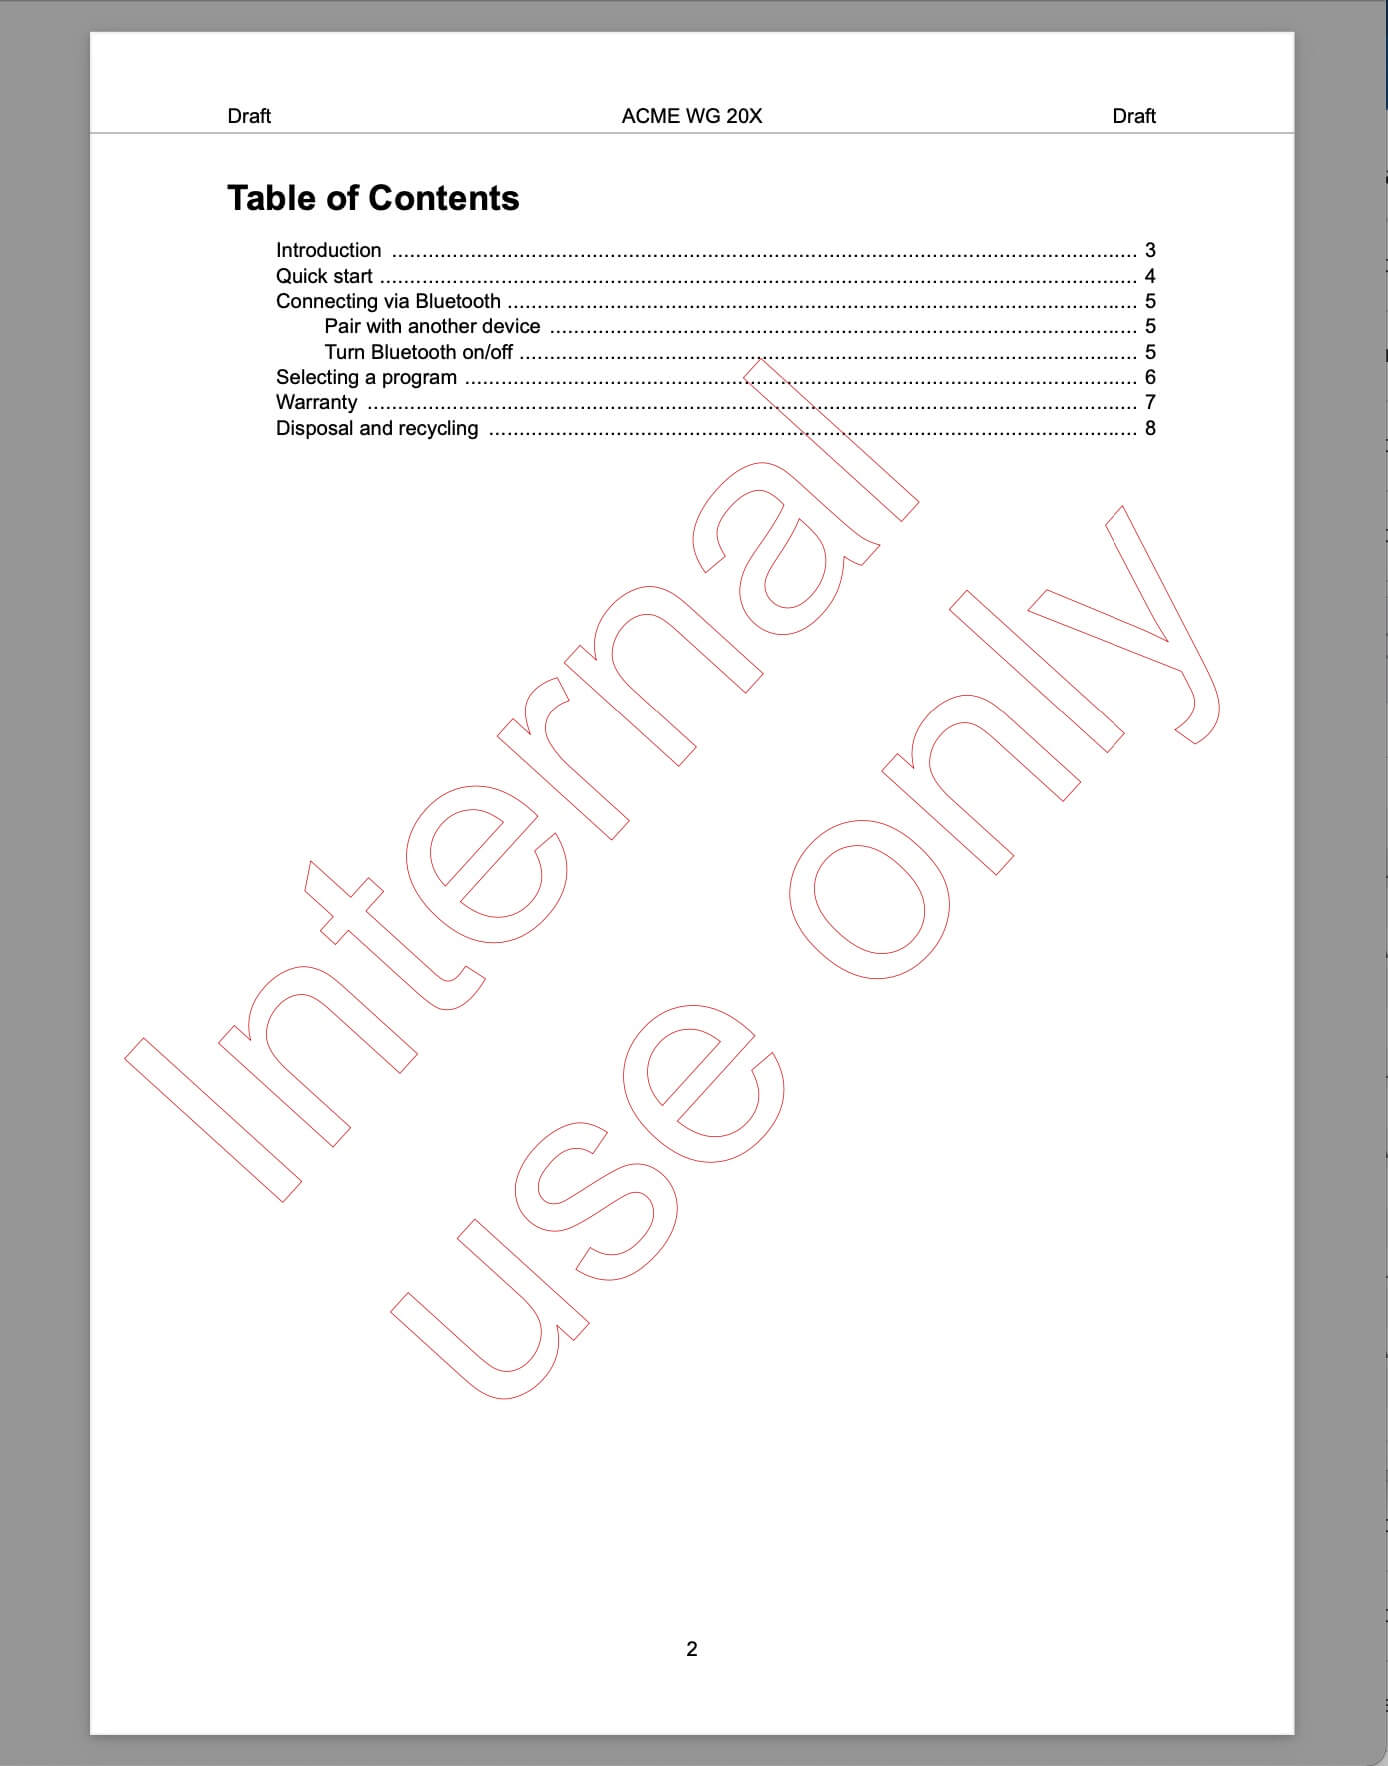 Table of contents page for a PDF. It has draft in the header and "internal use only" shown as outlined letters running diagonally across the page